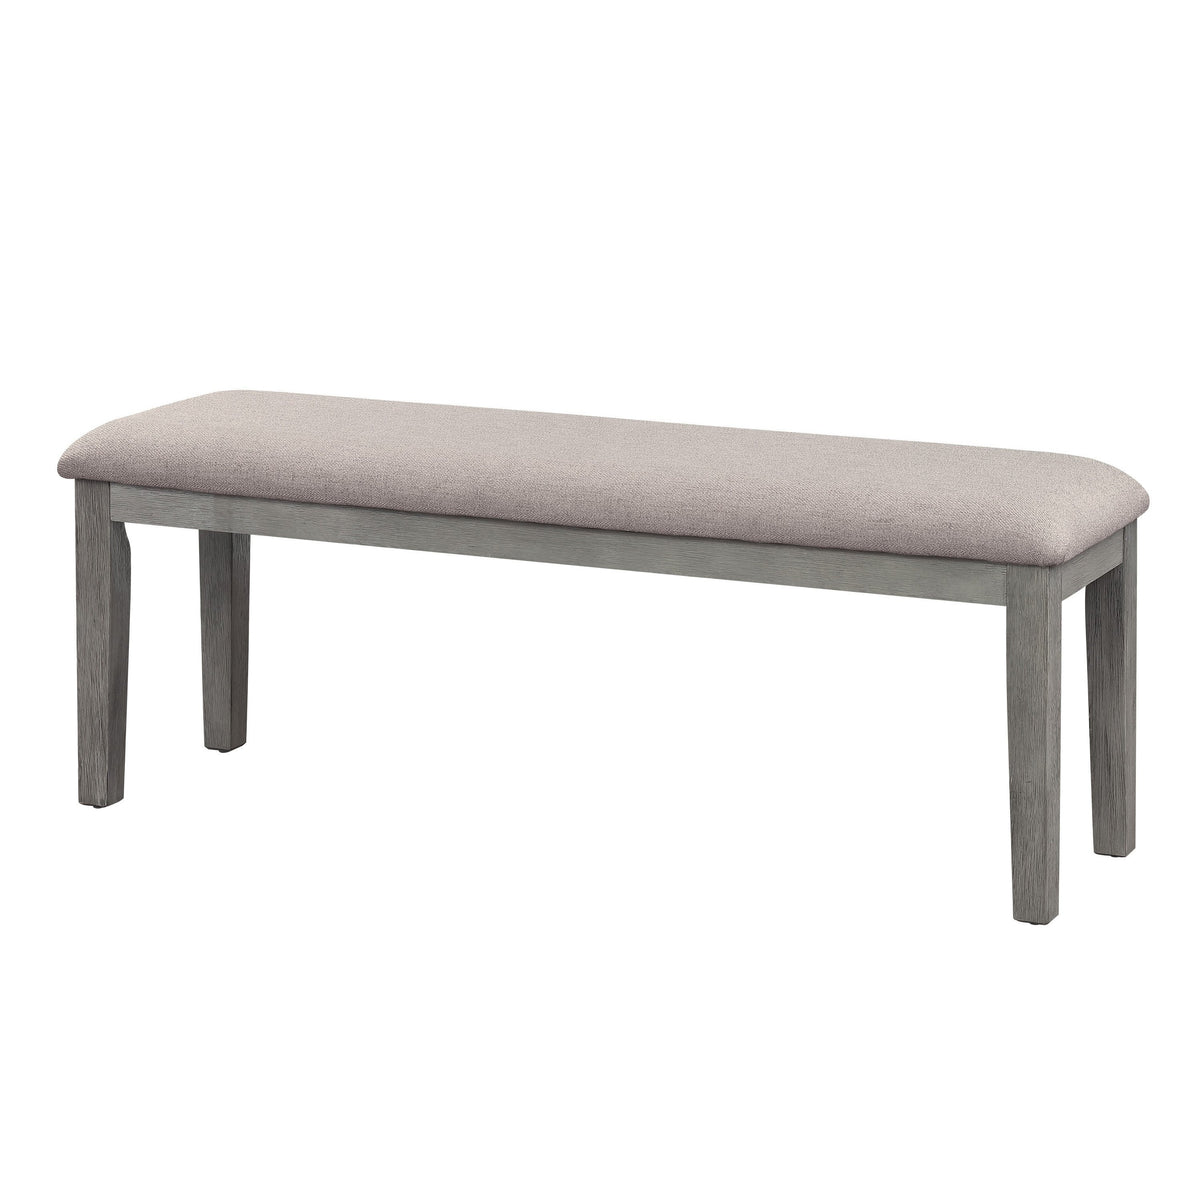 Rectangular Style Wooden Bench with Fabric Upholstered Seat, Gray - BM220936